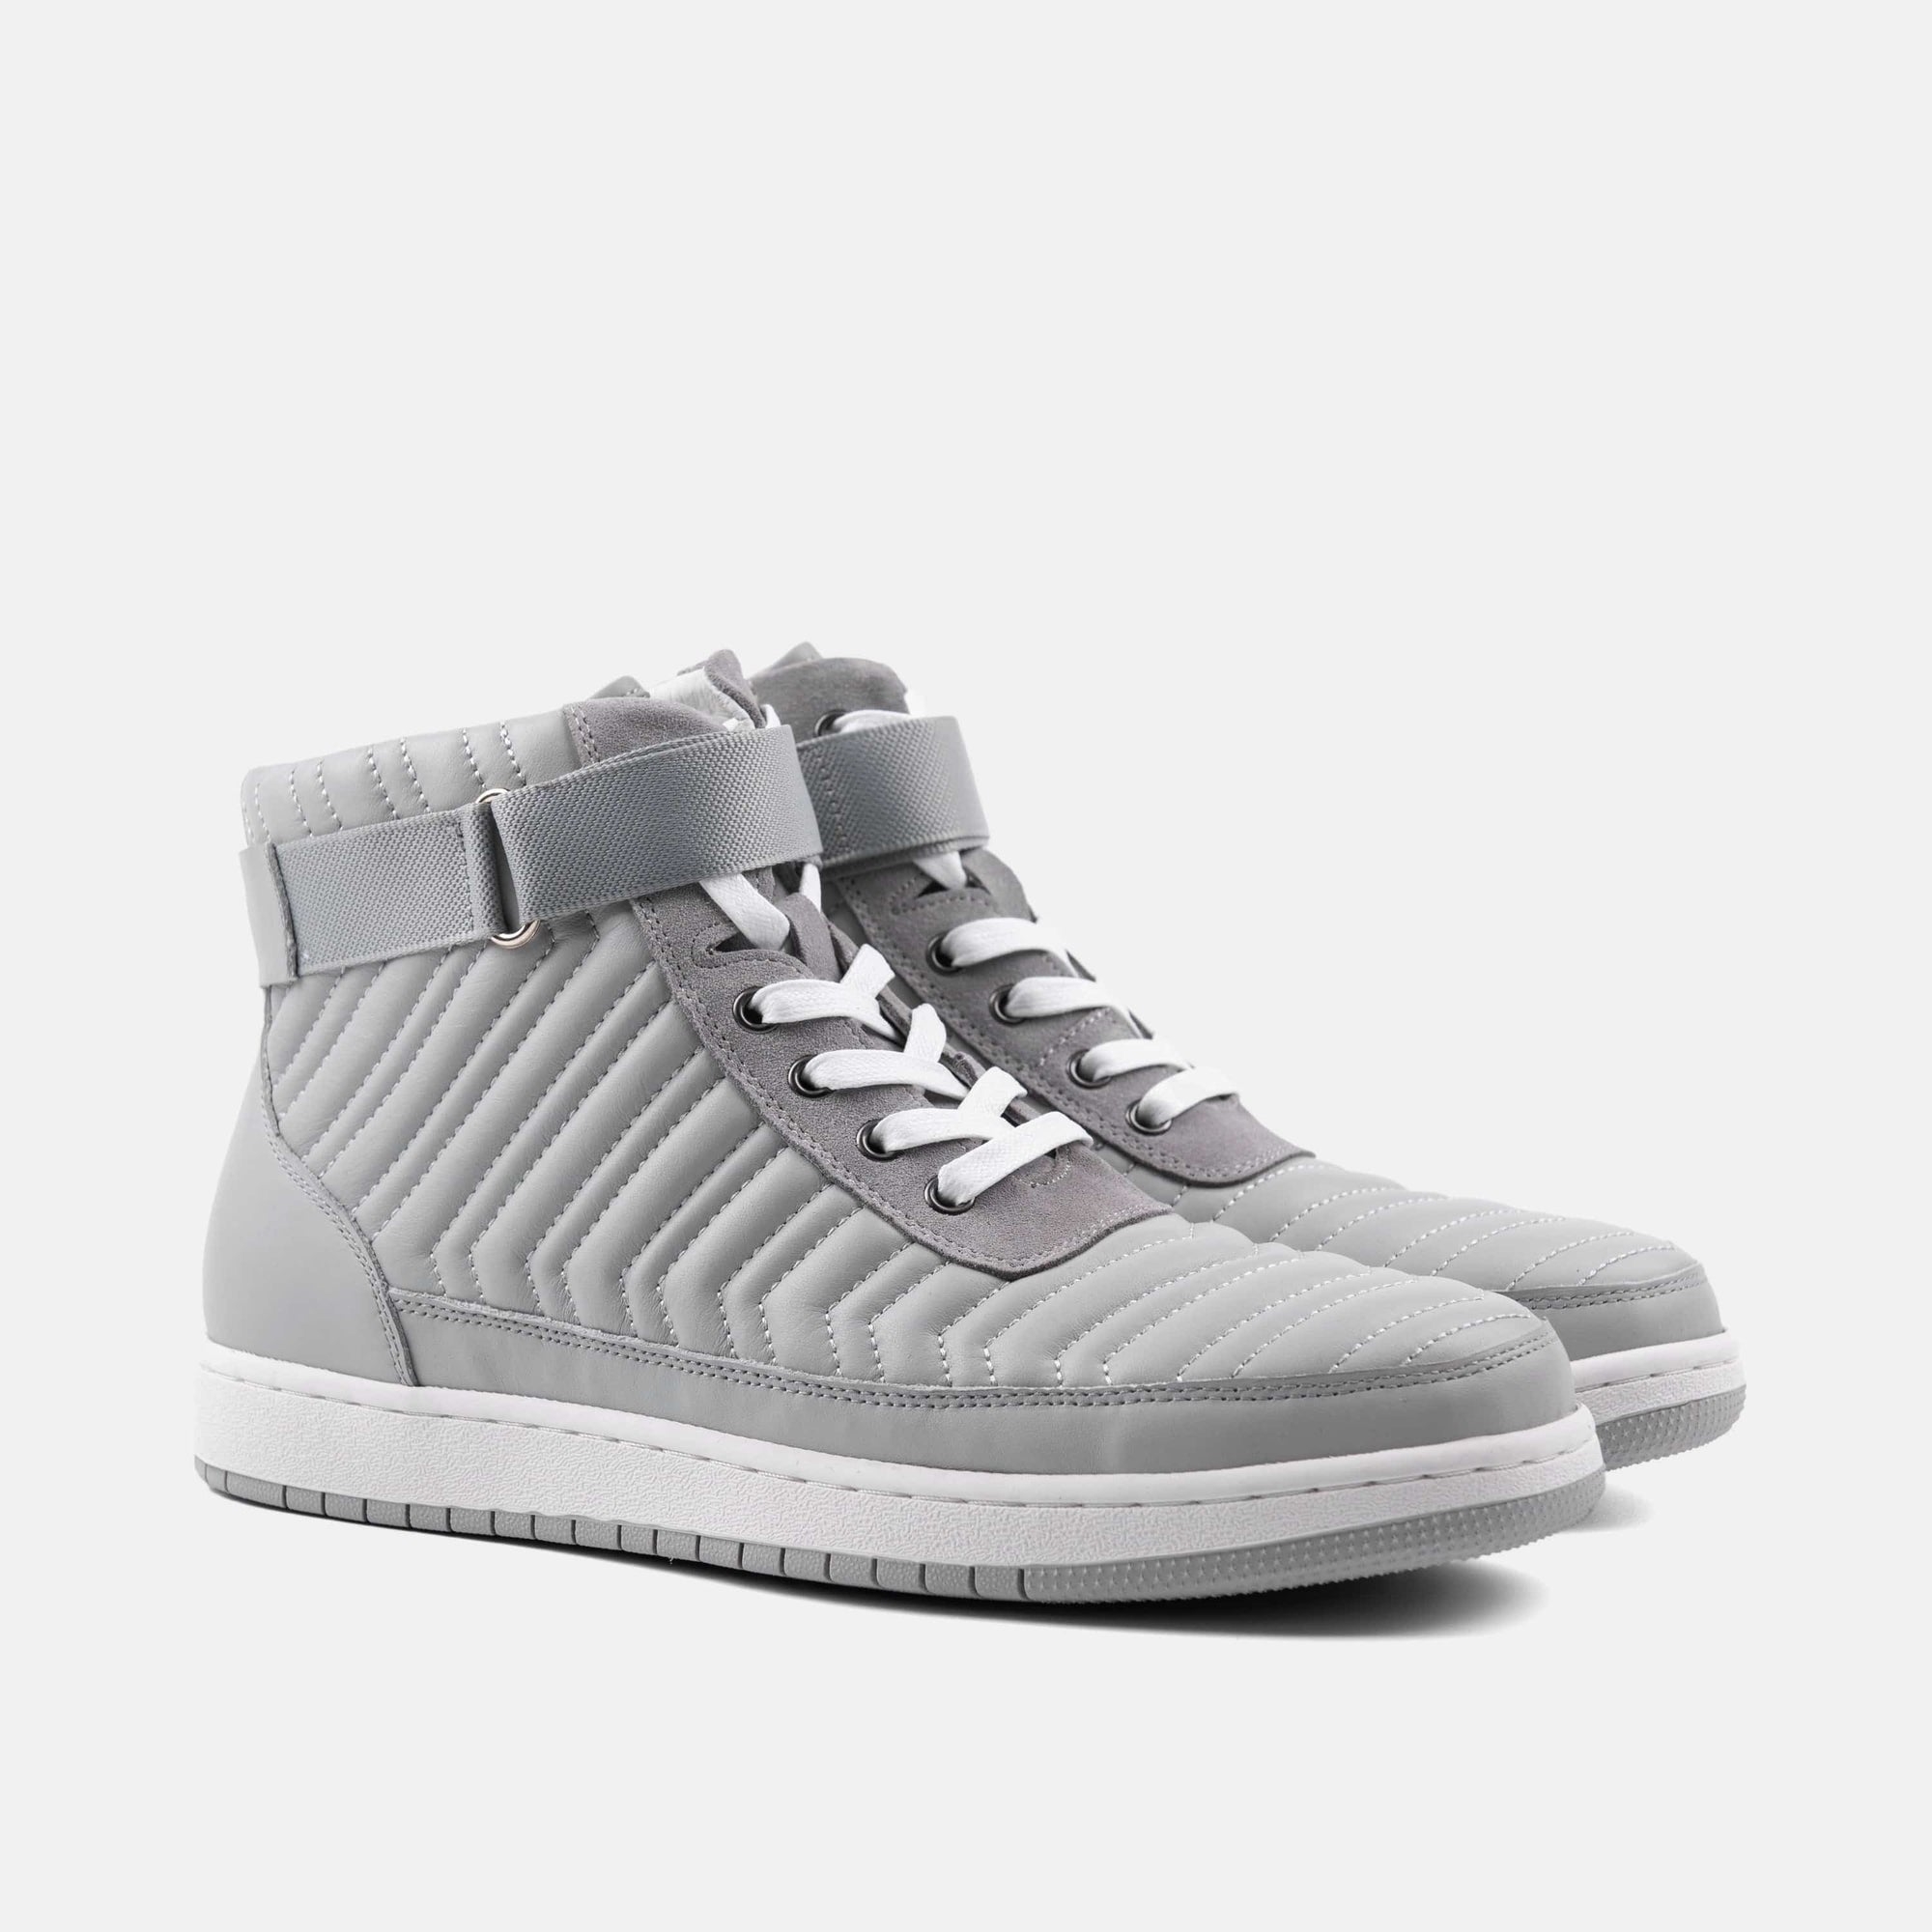 Yesler Grey Leather High Top Sneakers